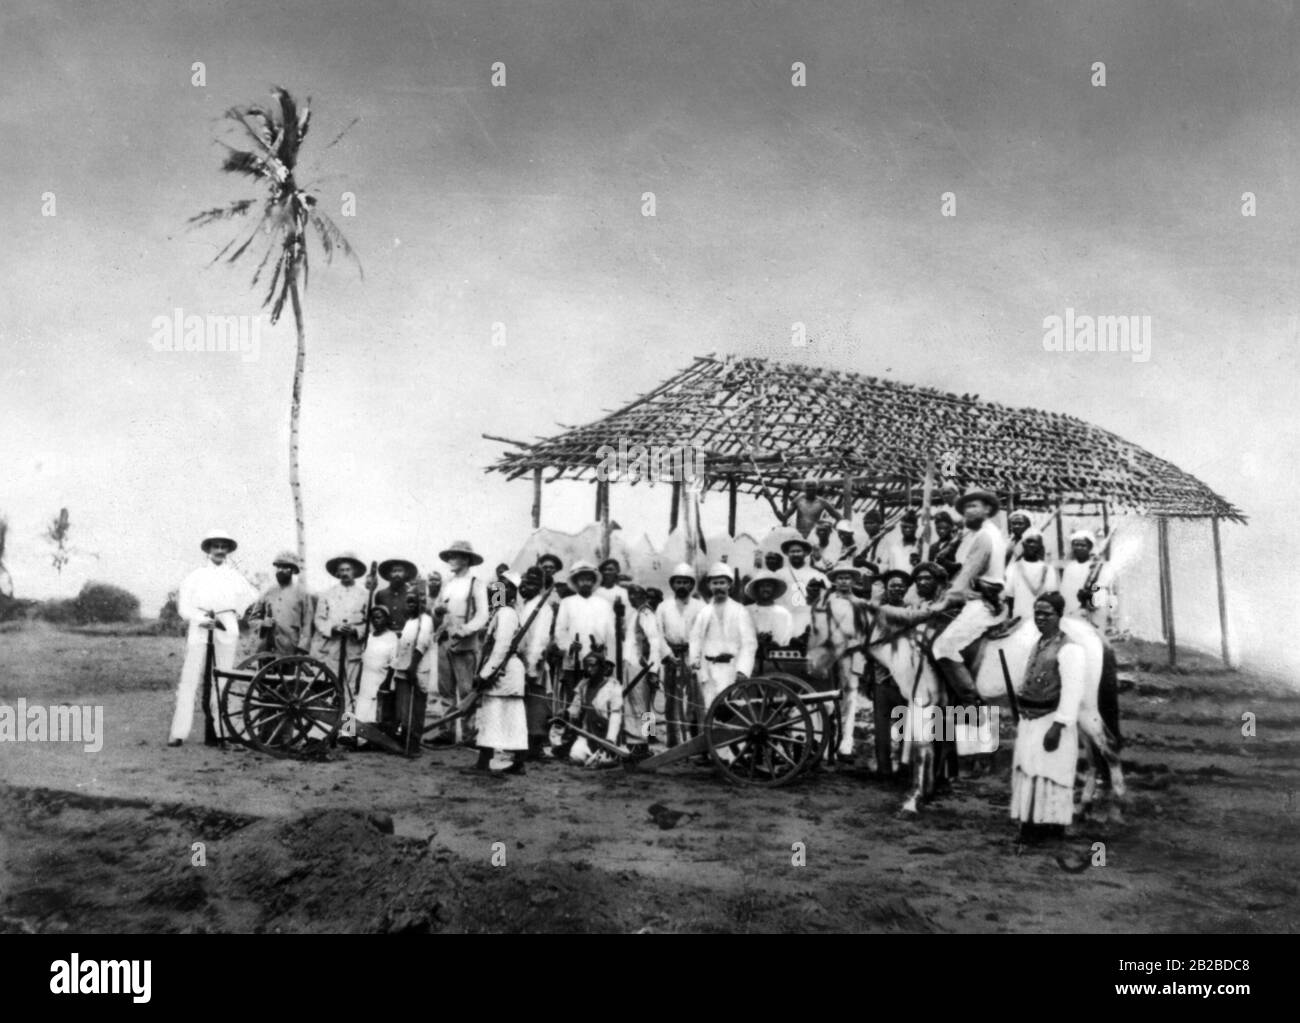 Arab fighters in Bagamojo, who practiced an uprising against the German colonial administration, as this incorporated the territory of today's Tanzania in the German Reich in 1888. Since the Omani Sultan moved his capital to Zanzibar in 1840, many Arabs settled on the east coast of Africa and established their base for slave trade. Stock Photo